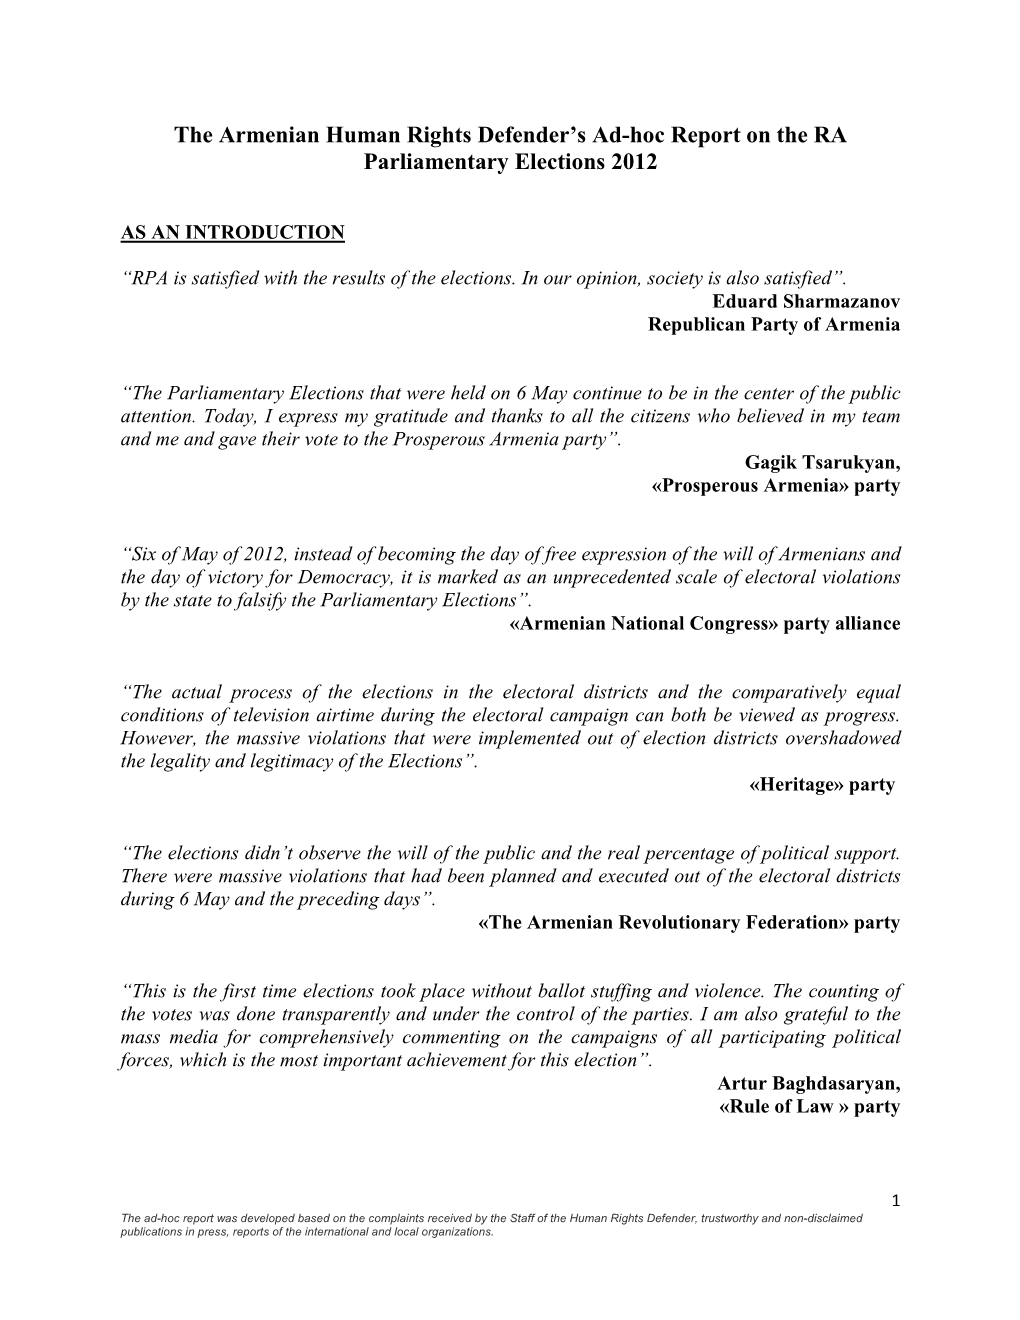 Armenian Human Rights Defender’S Ad-Hoc Report on the RA Parliamentary Elections 2012